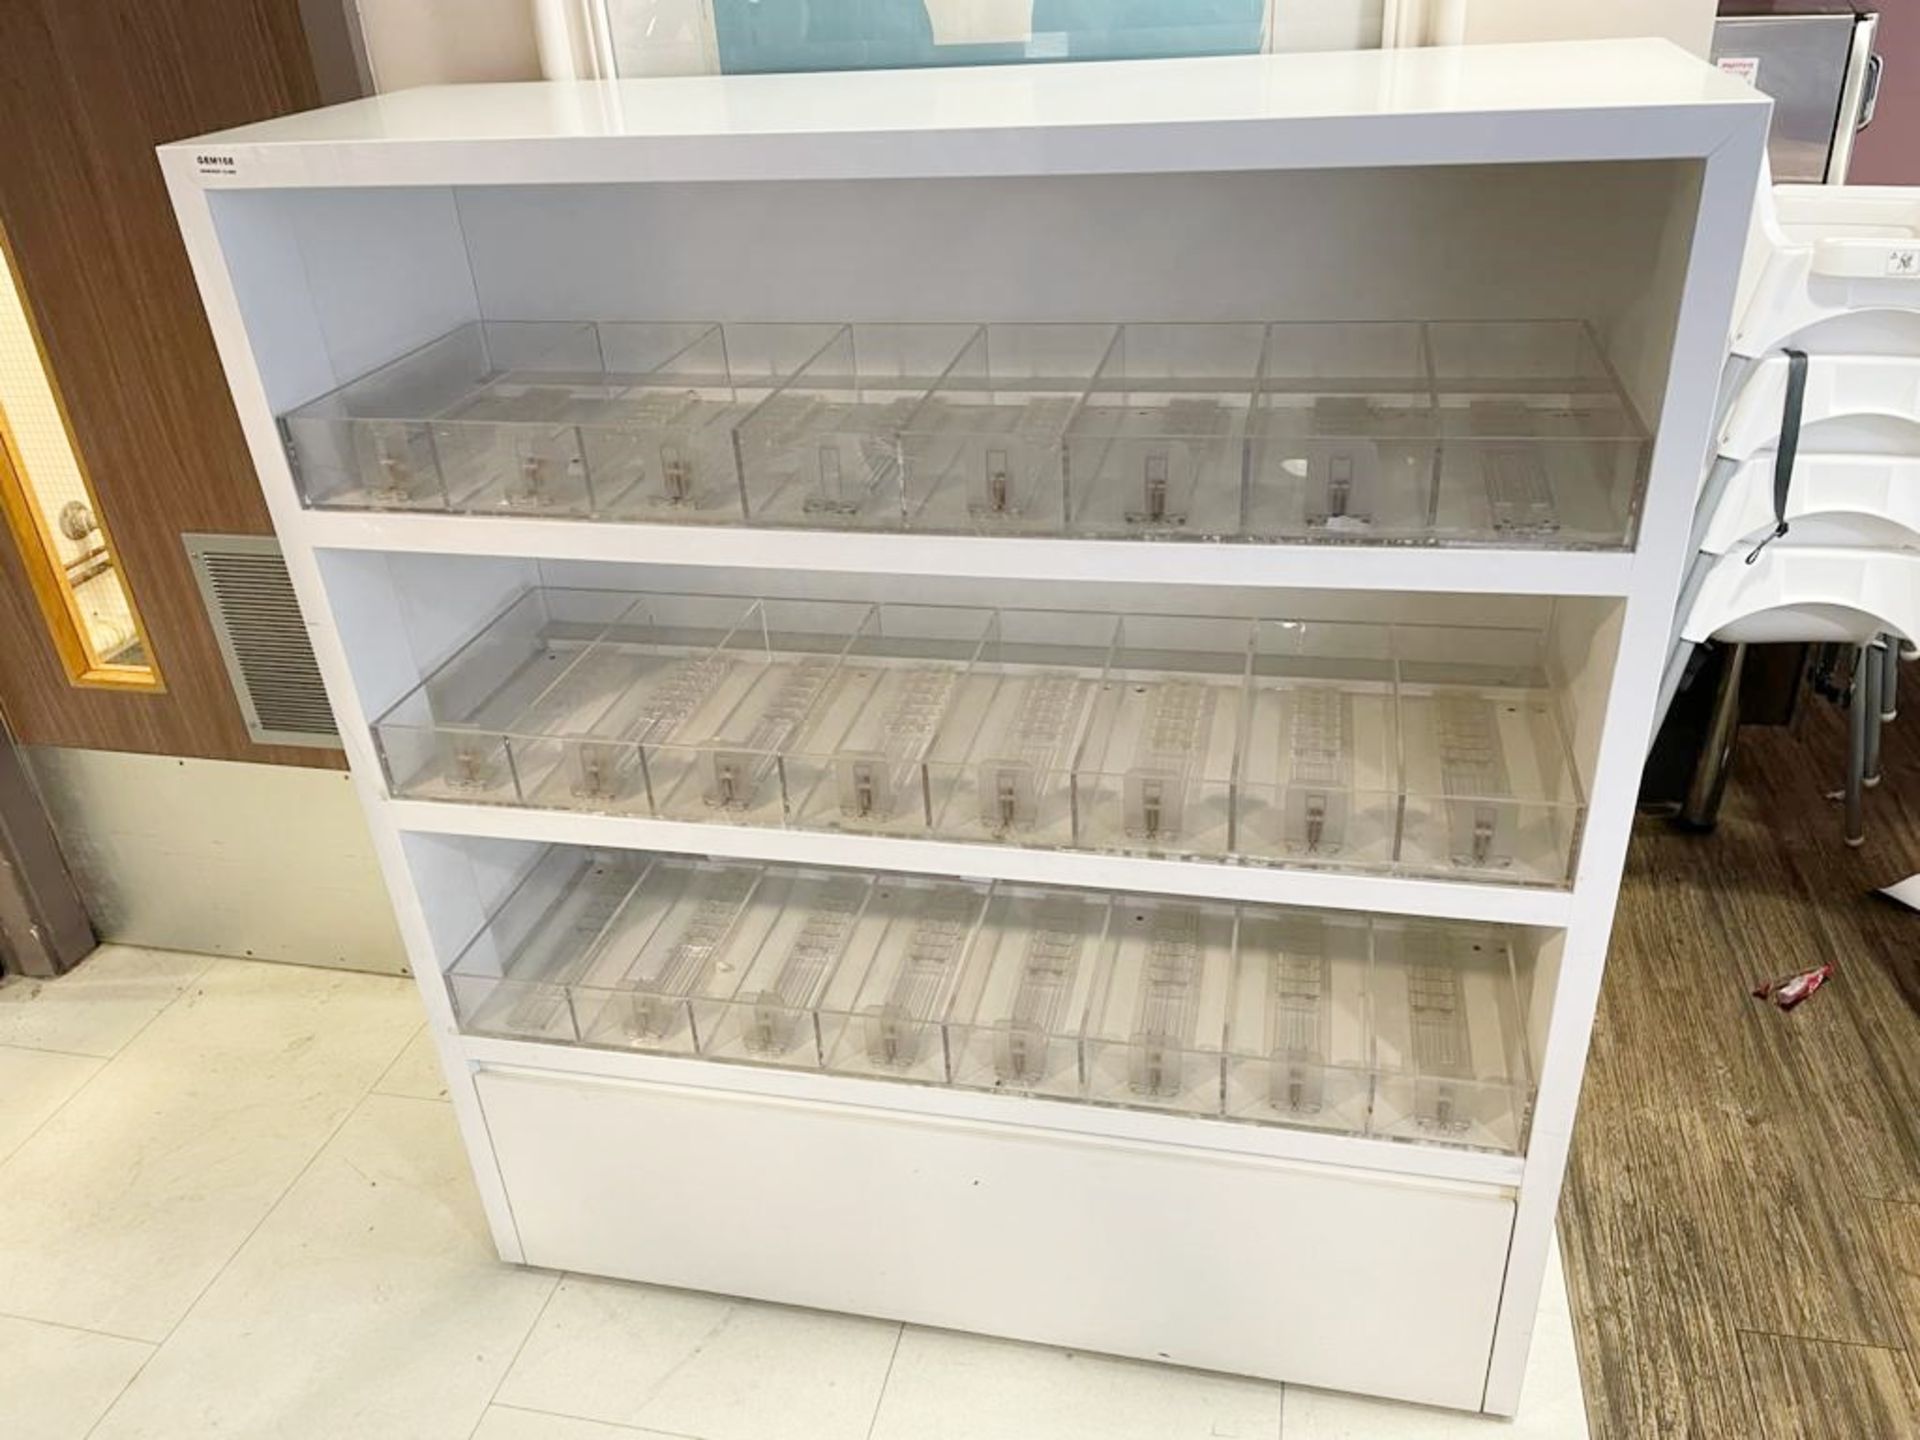 1 x Retail Display Unit on Castors With Acrylic Dispenser Shelves Suitable For Foods, Stock, Packets